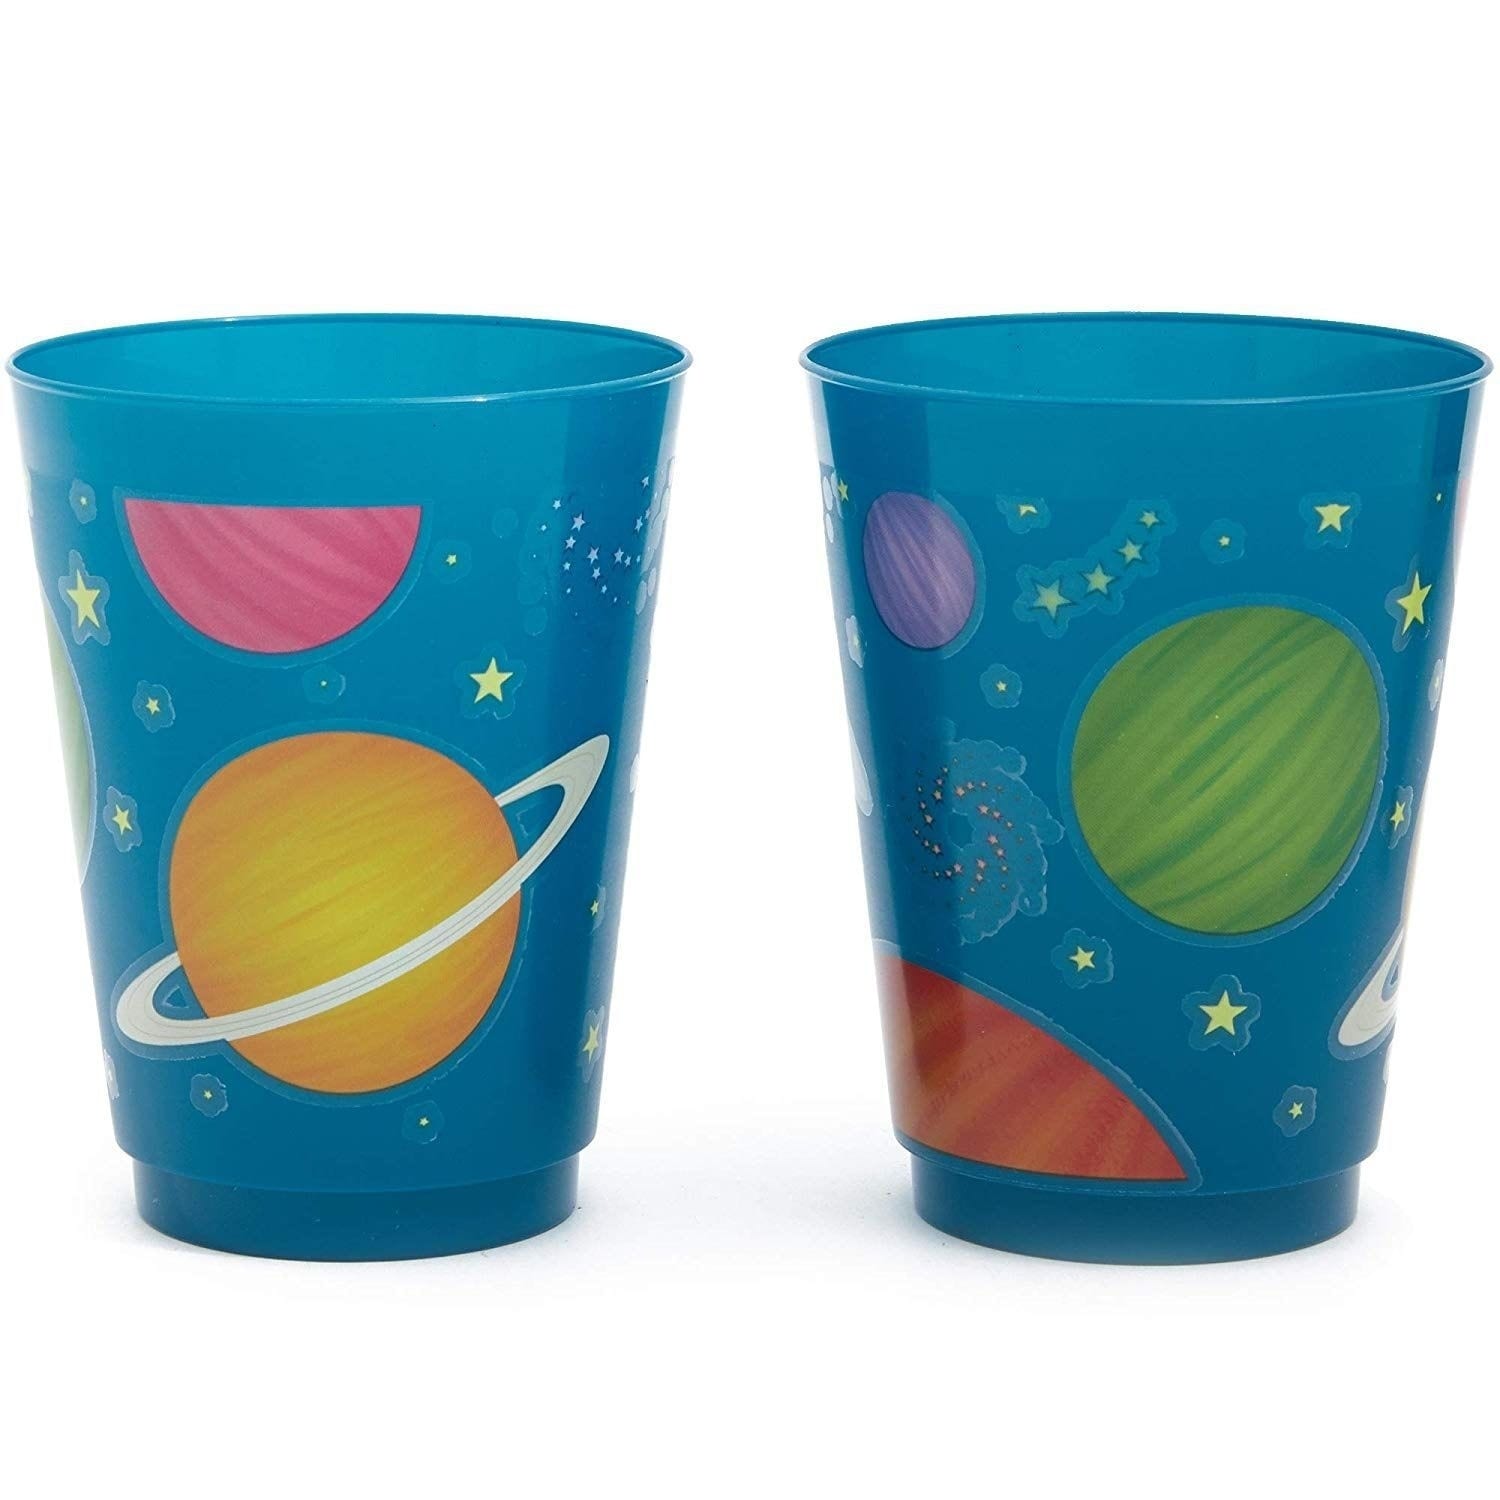 https://ak1.ostkcdn.com/images/products/31094300/16-Pack-Plastic-16-oz-Party-Cups-Solar-System-Planets-Galaxy-Space-Reusable-Tumblers-for-Kids-Birthday-8fdb84d8-5c50-49f5-a3ca-b6a08aa5946c.jpg